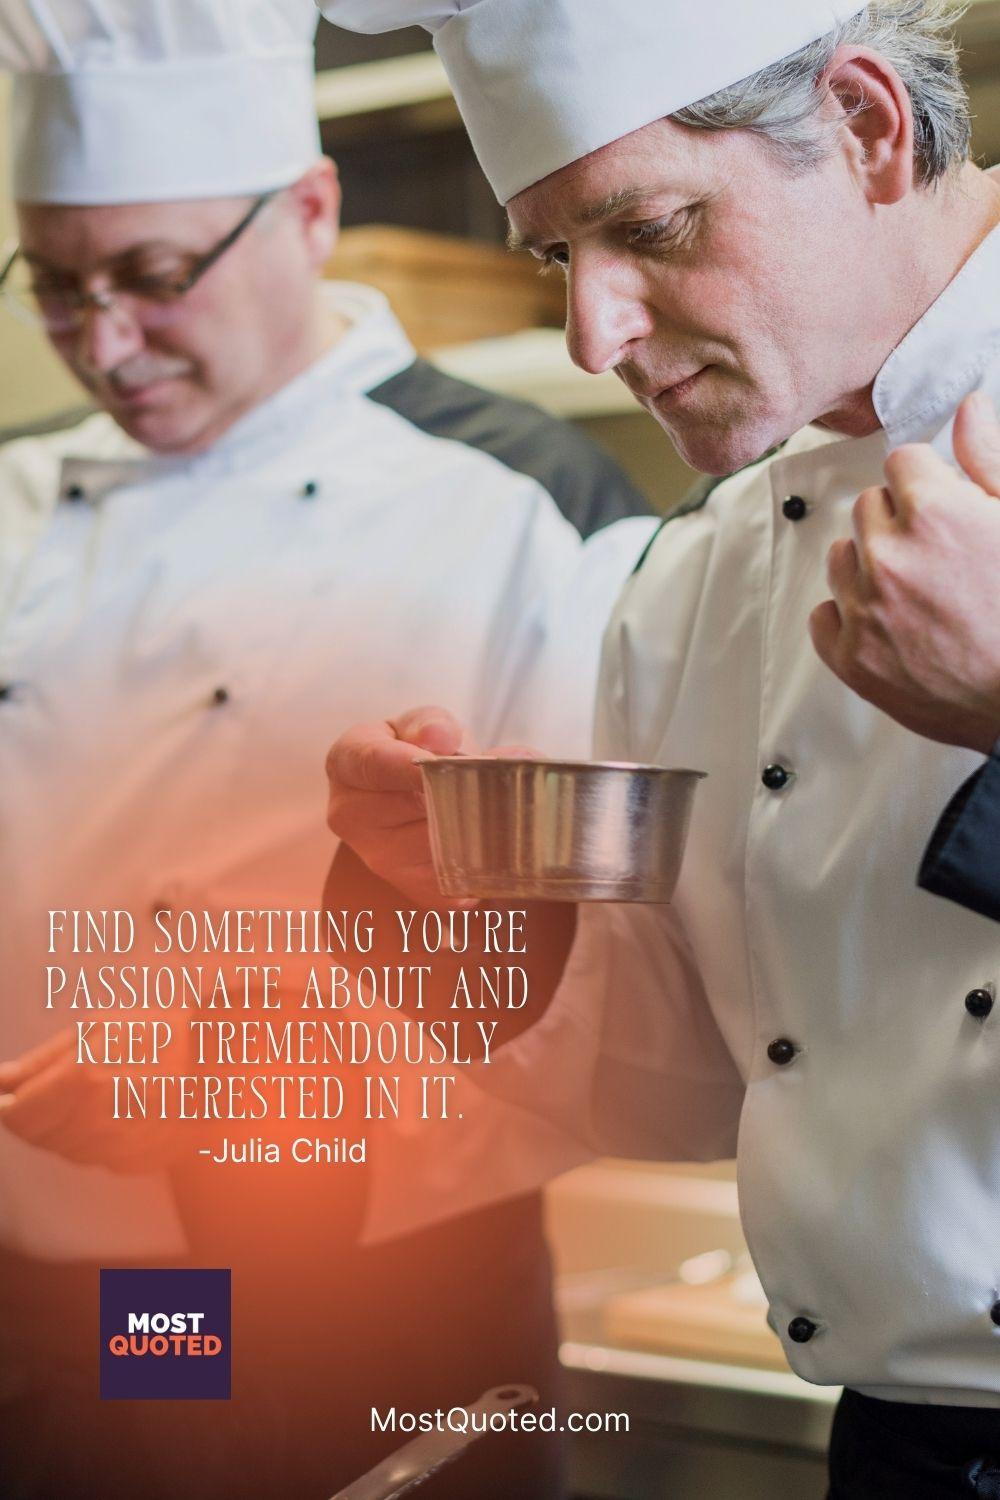 Find something you’re passionate about and keep tremendously interested in it. - Julia Child